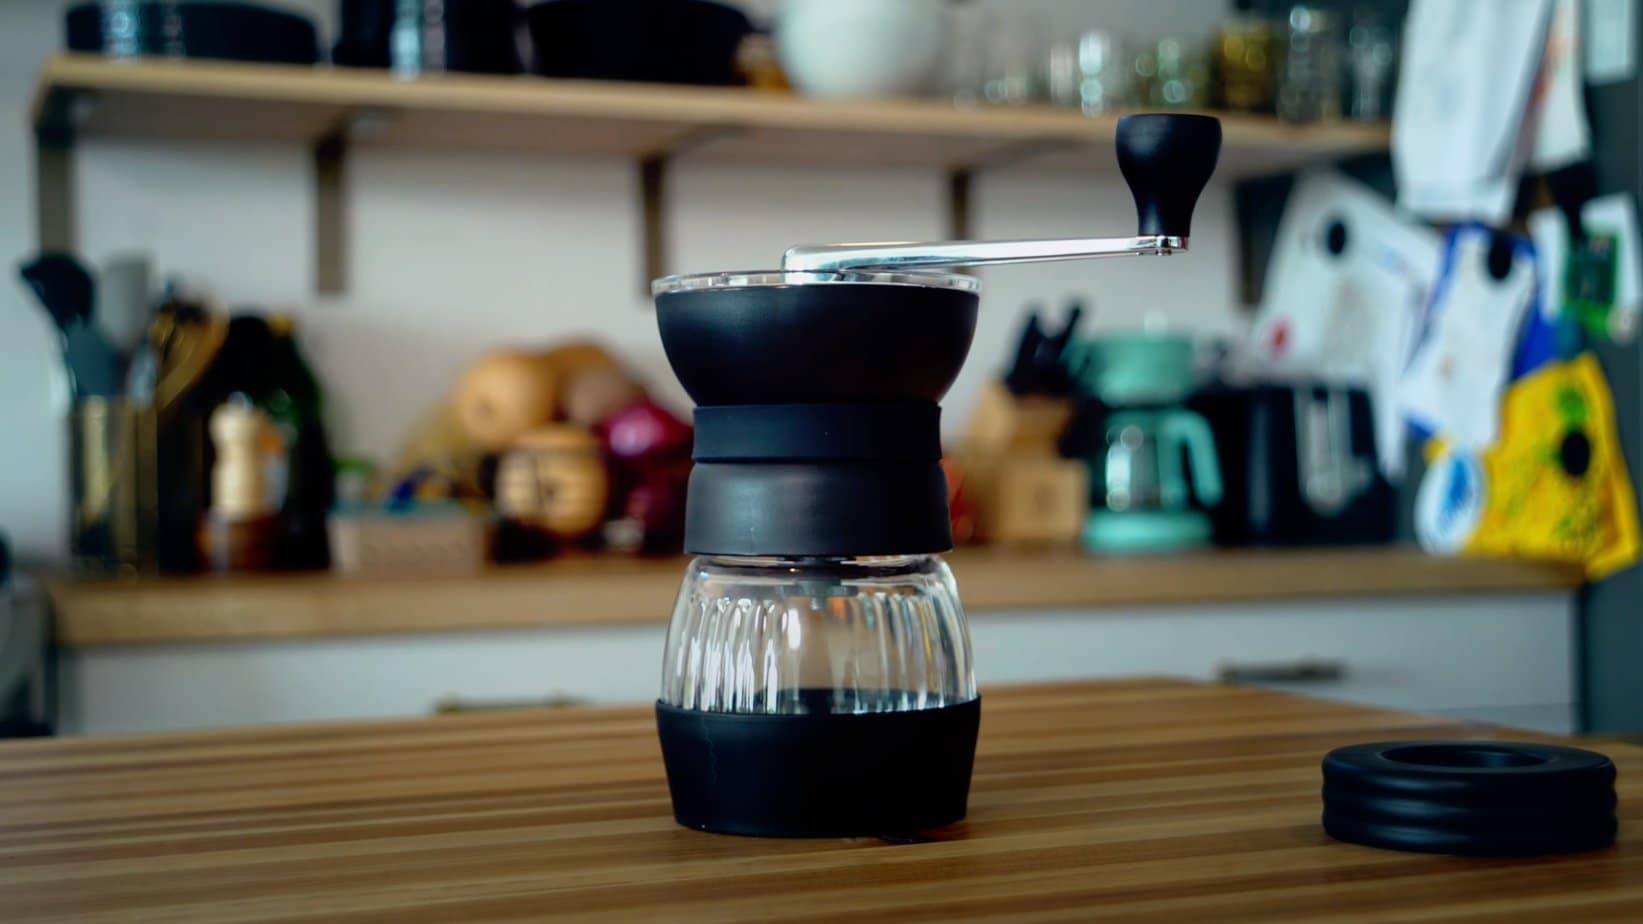 Hario Skerton Pro Coffee Grinder on the wooden table 